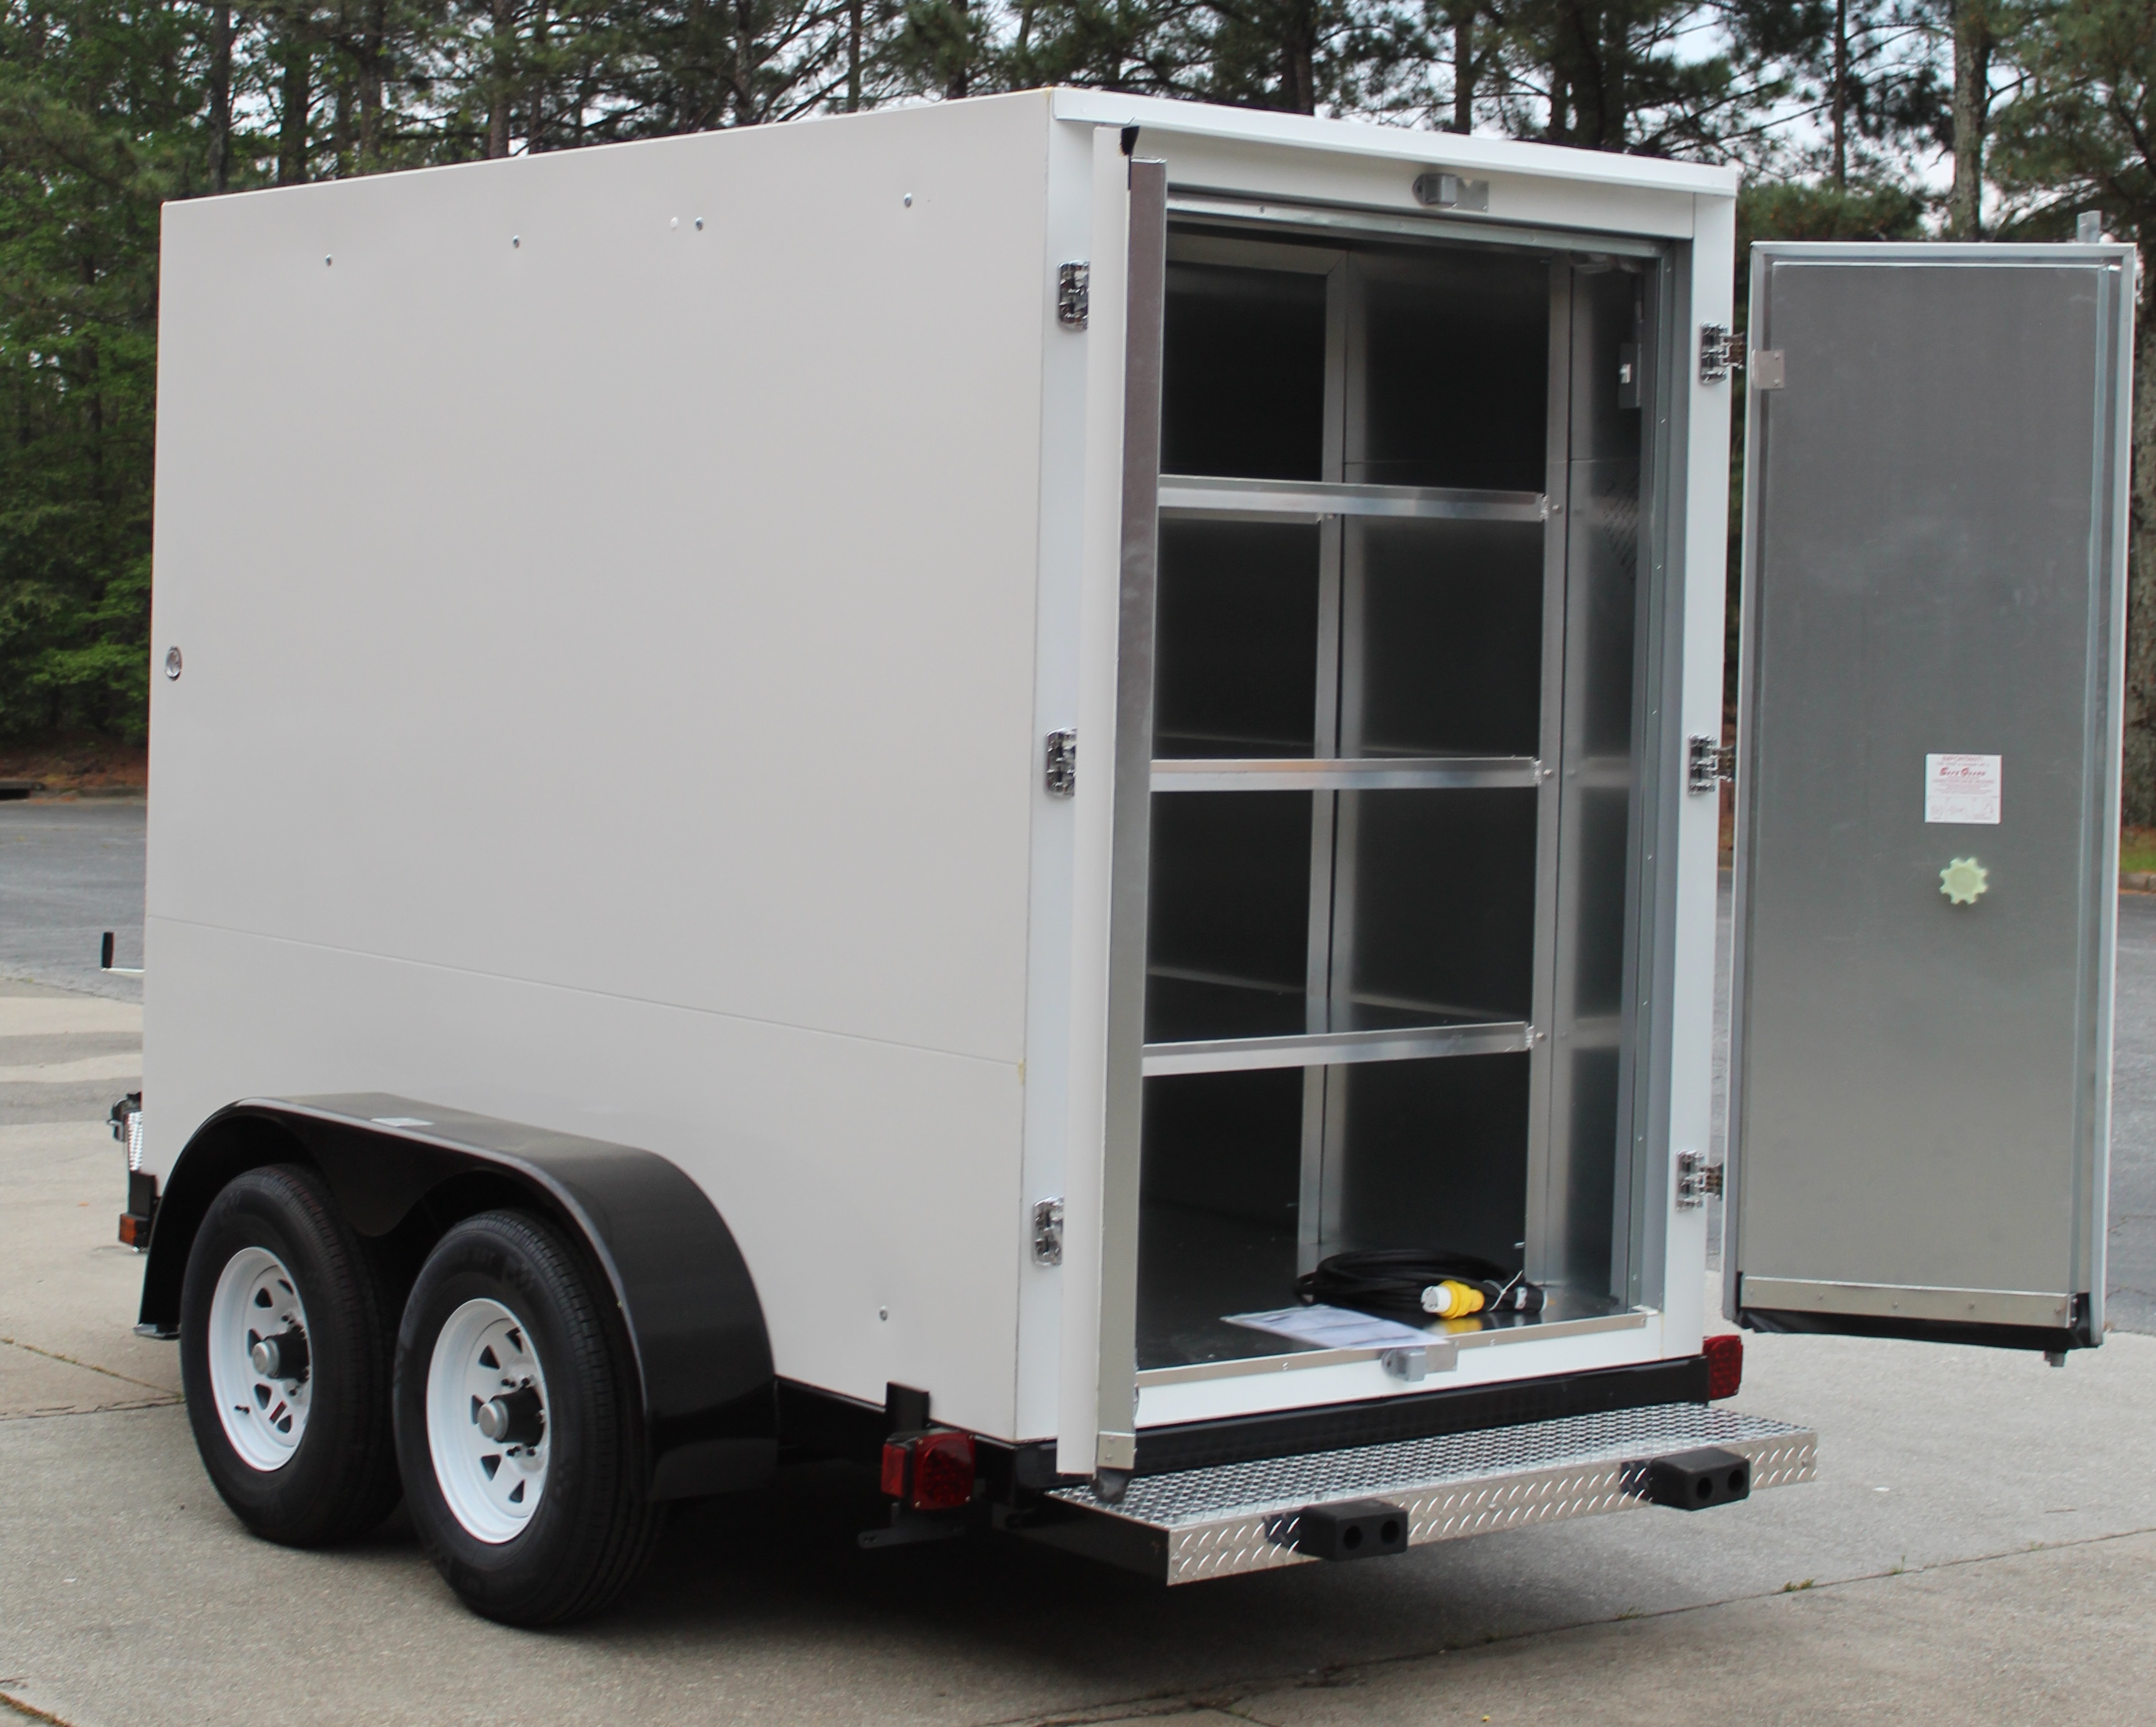 Refrigerated Trailer 5x10 with Racks